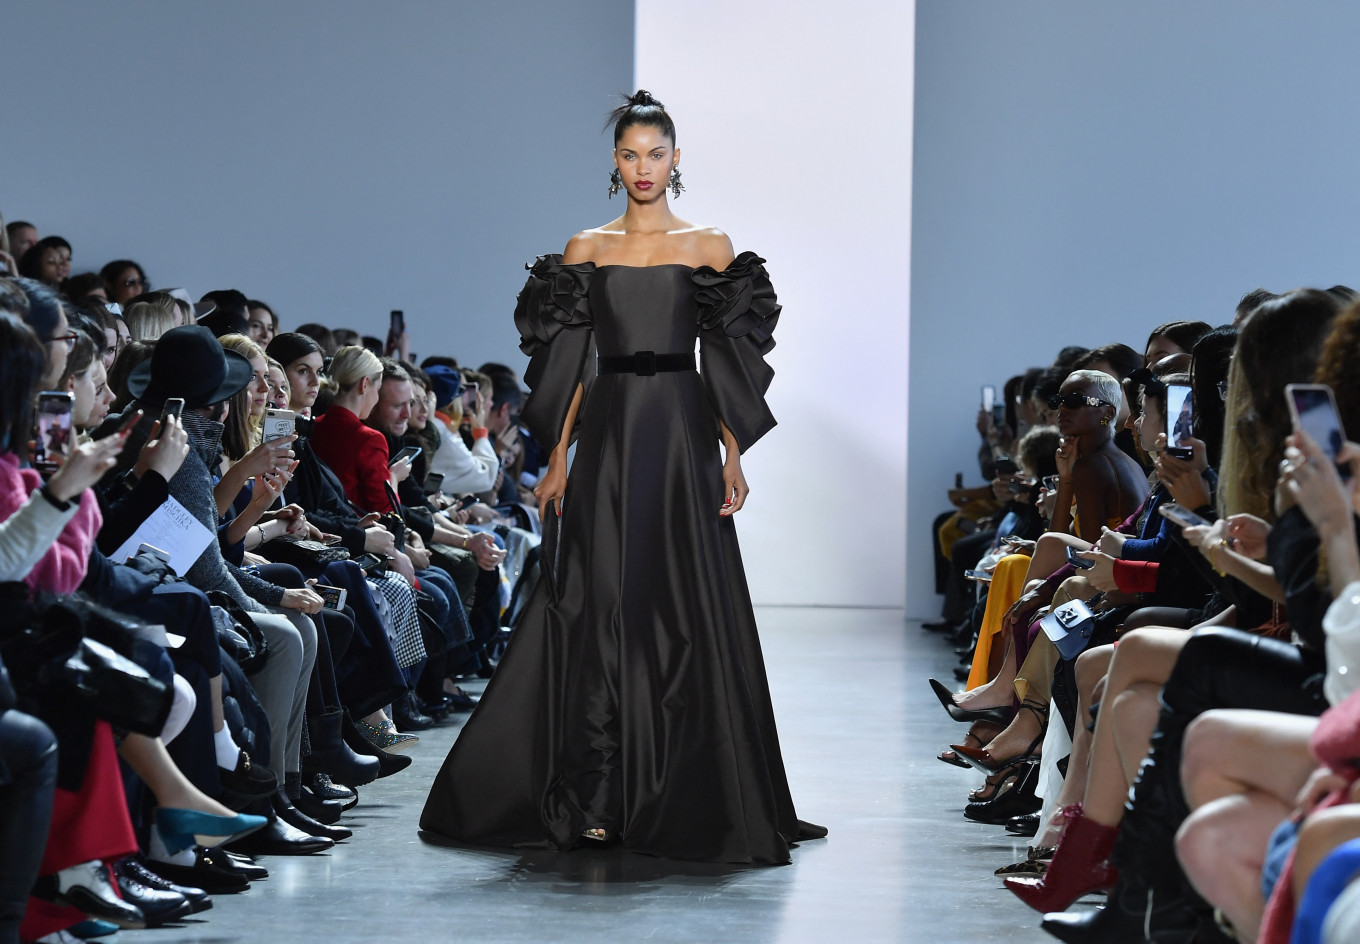 Paris fashion week to go ahead in September - Lifestyle - The Jakarta Post